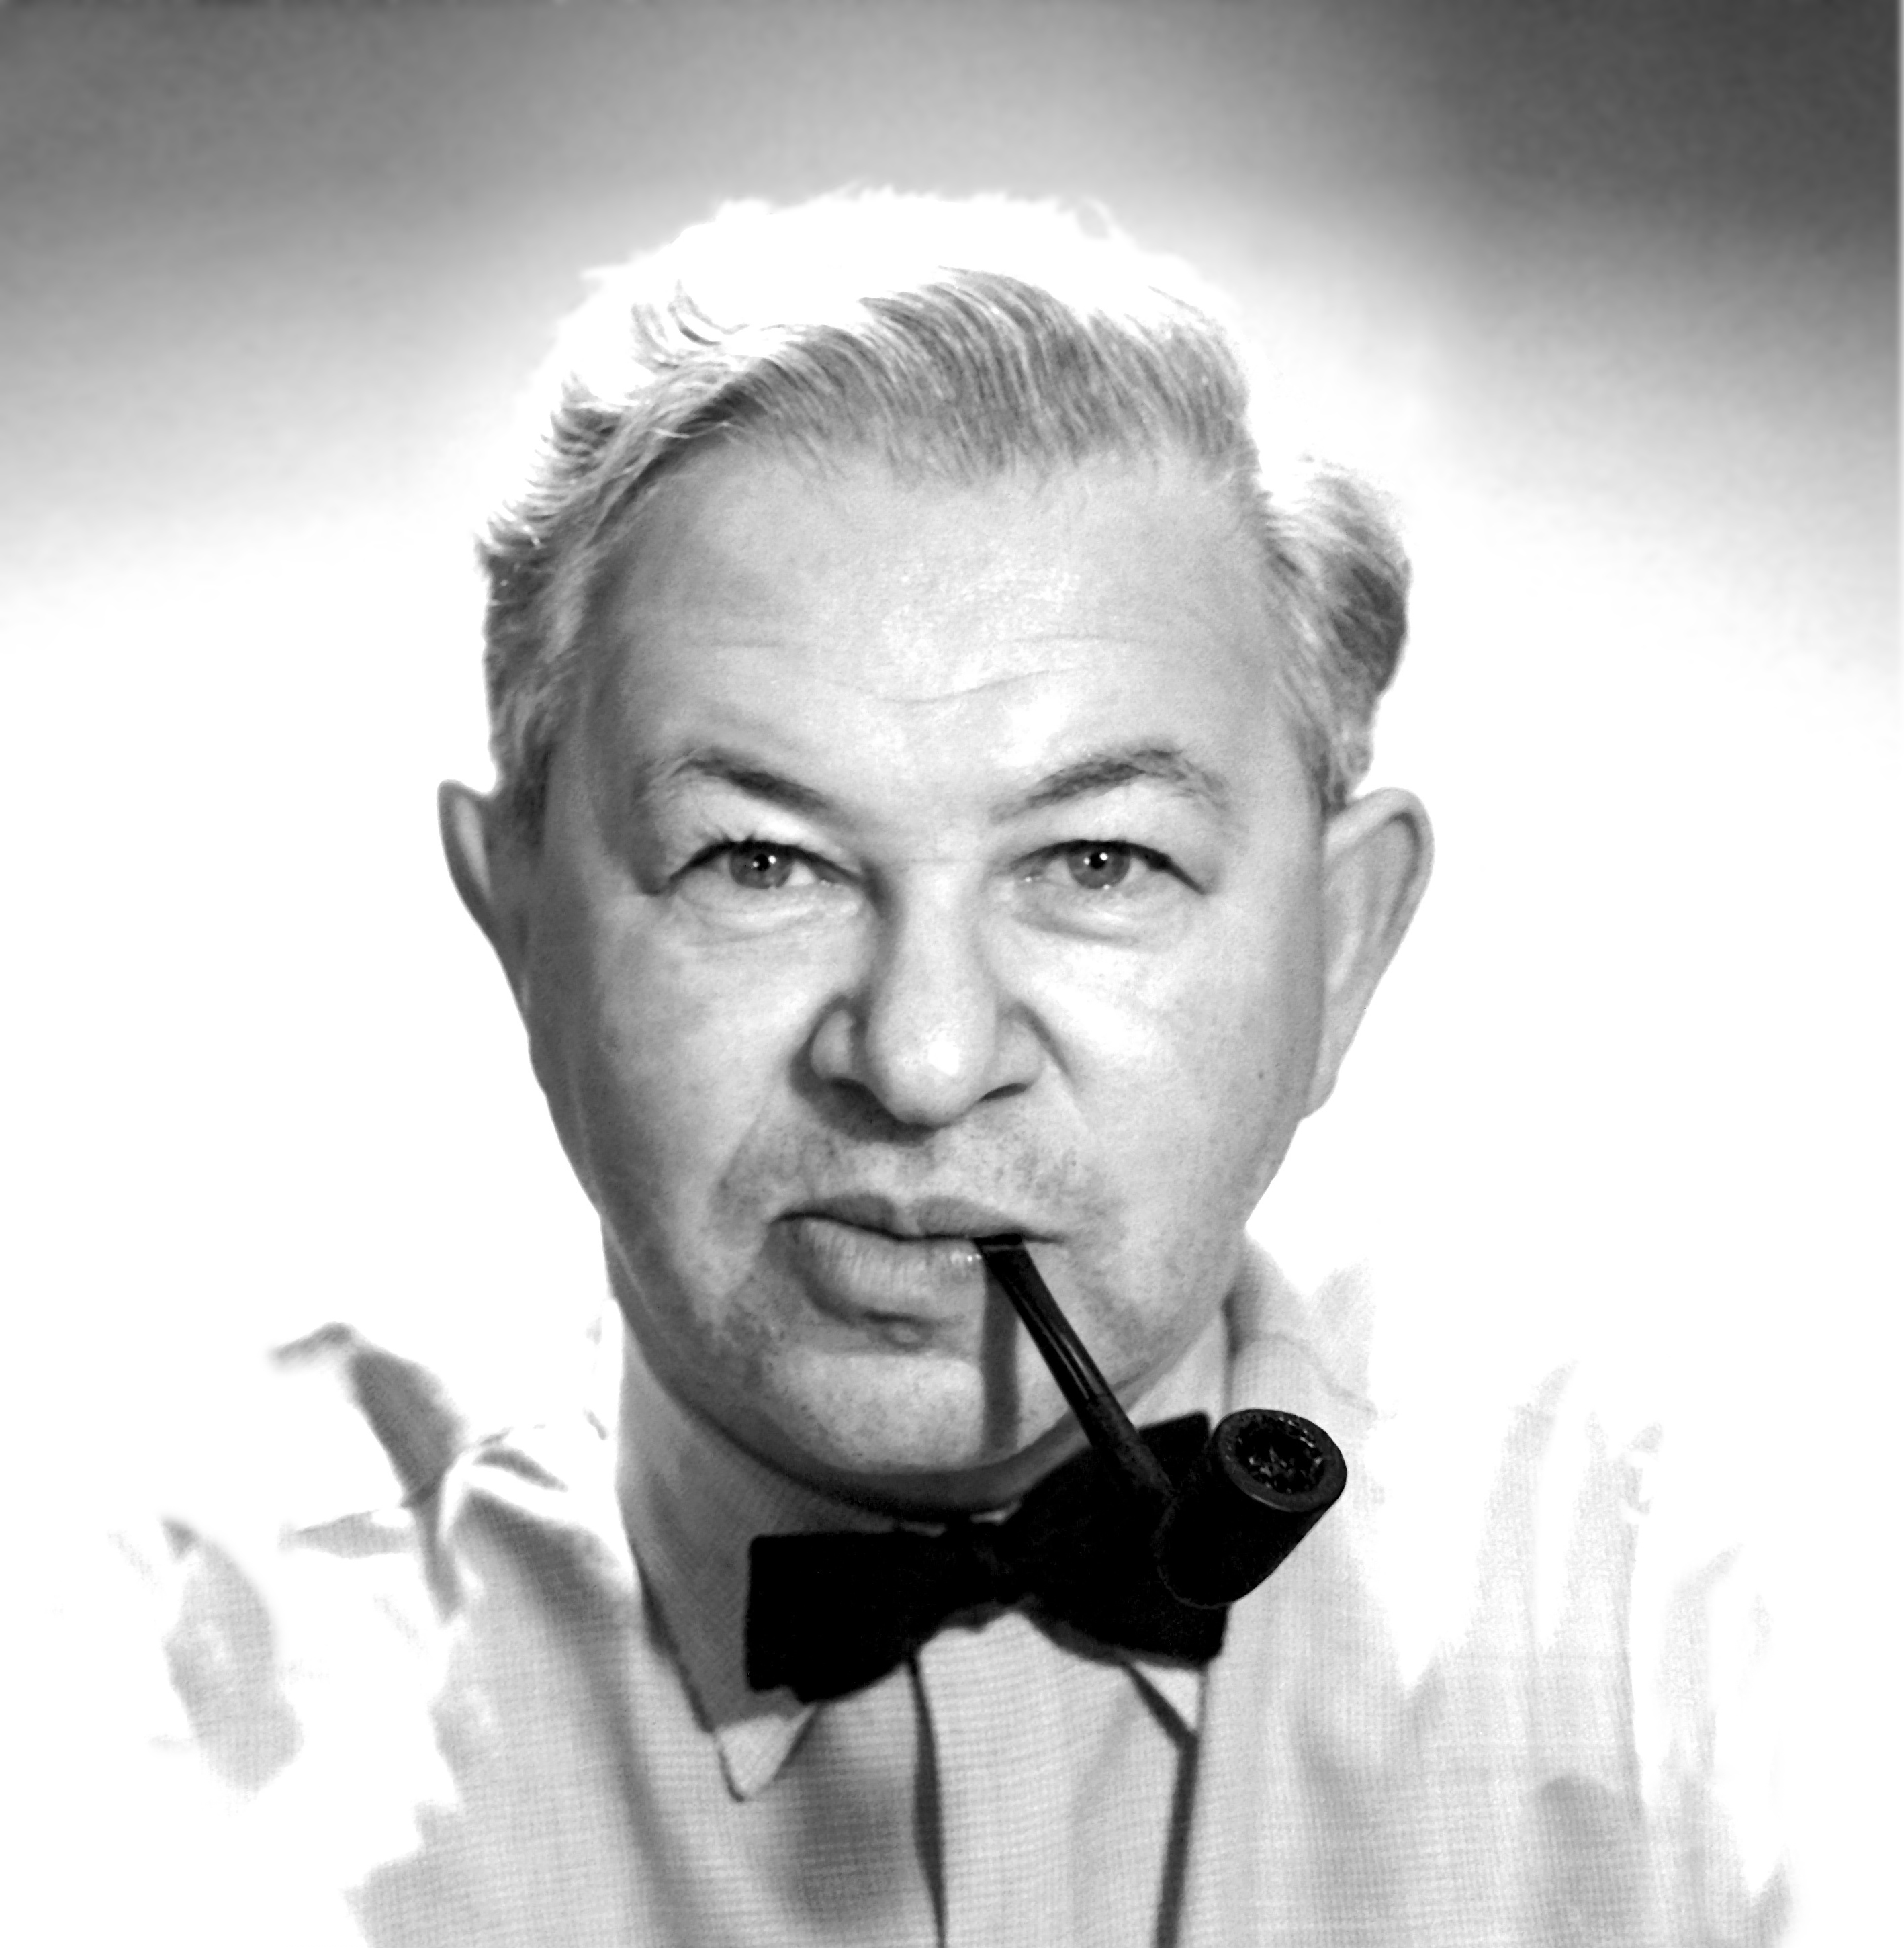 About Arne Jacobsen Clocks - Stories and inspiration